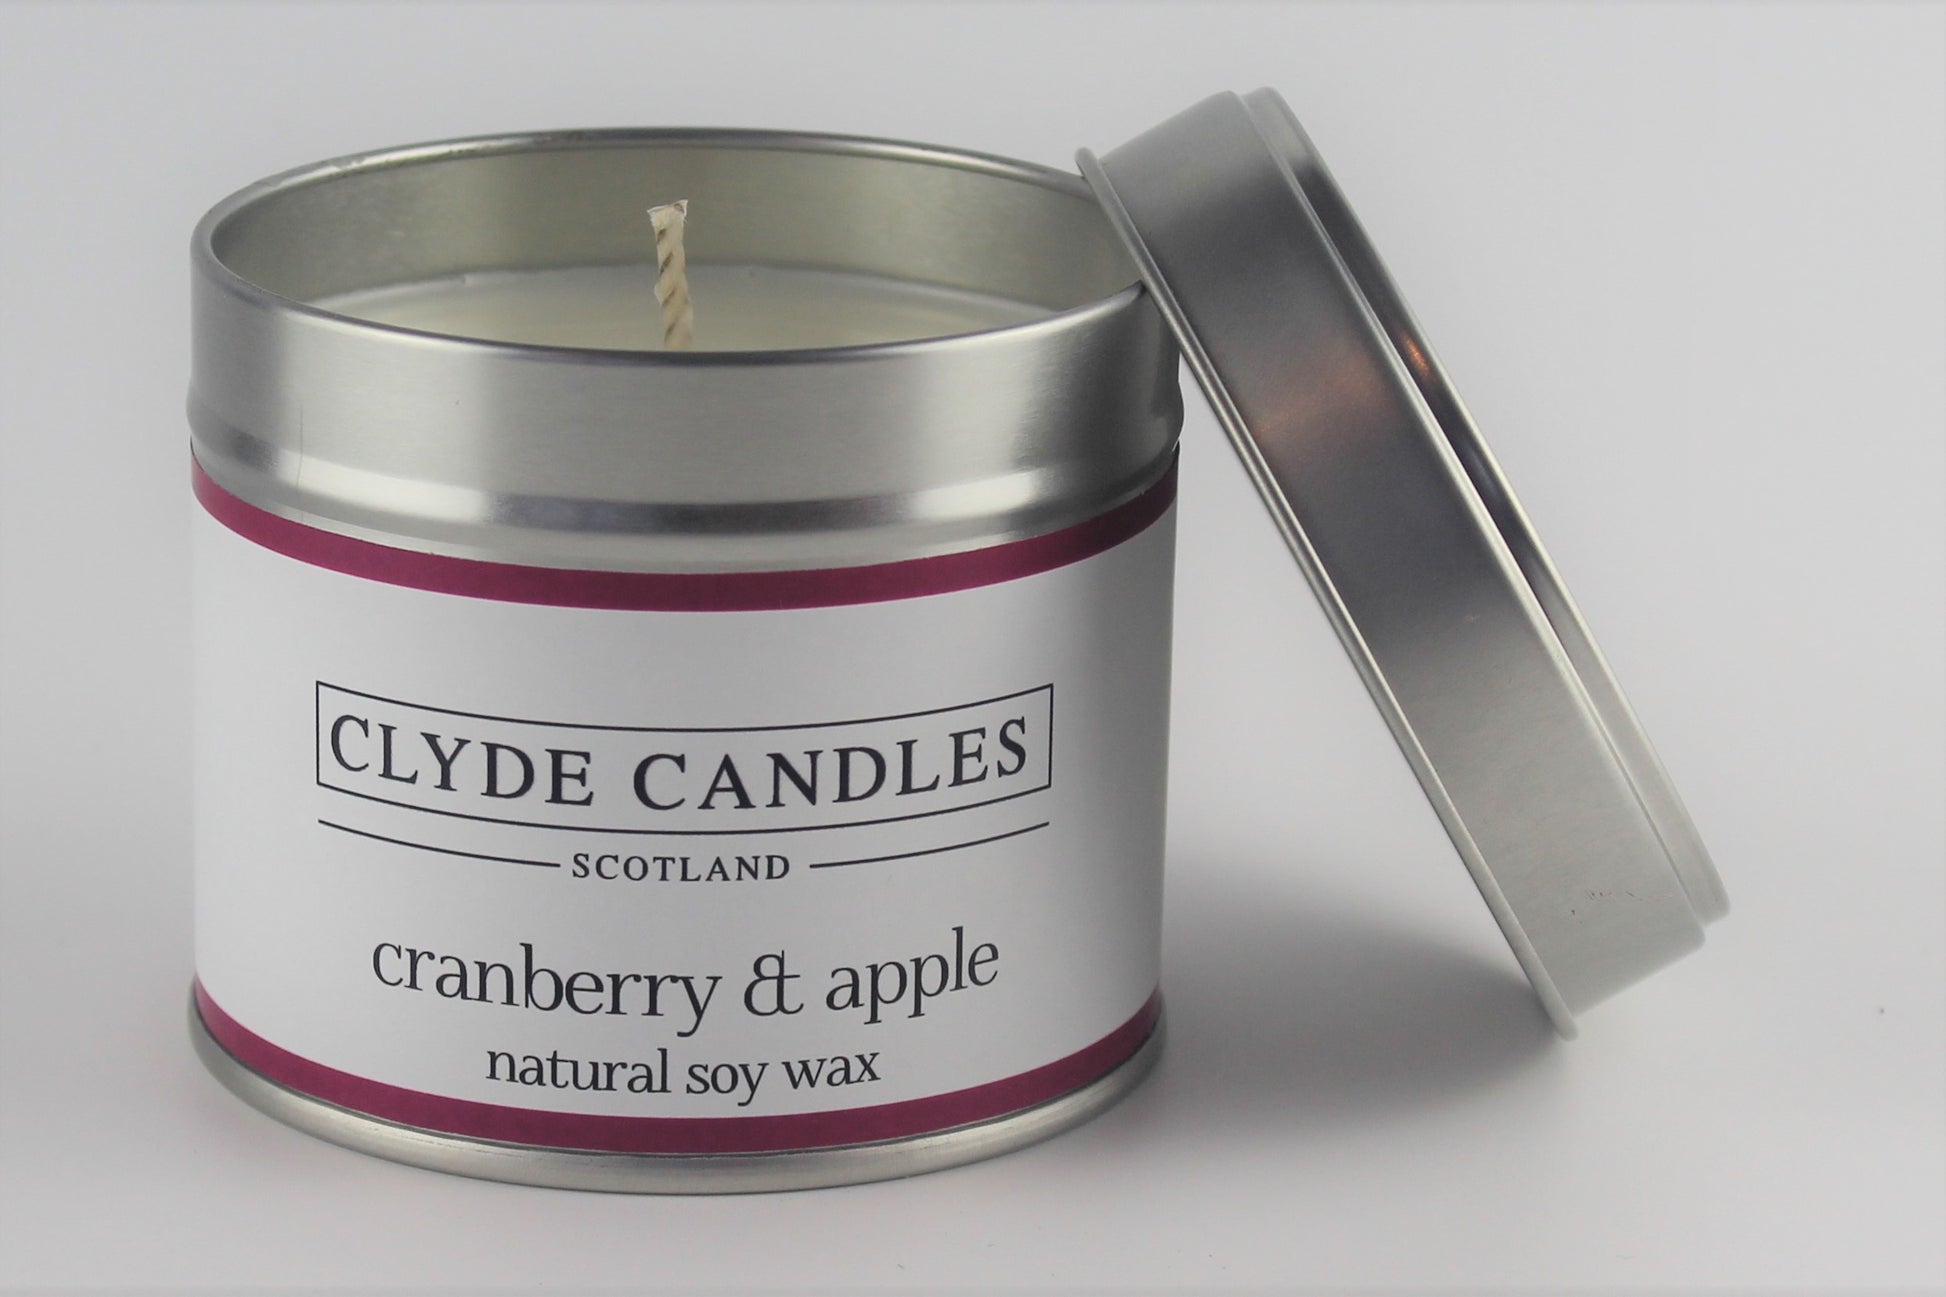 Cranberry & Apple Tin  Natural Soy wax, Scottish Candles, Clyde Candles